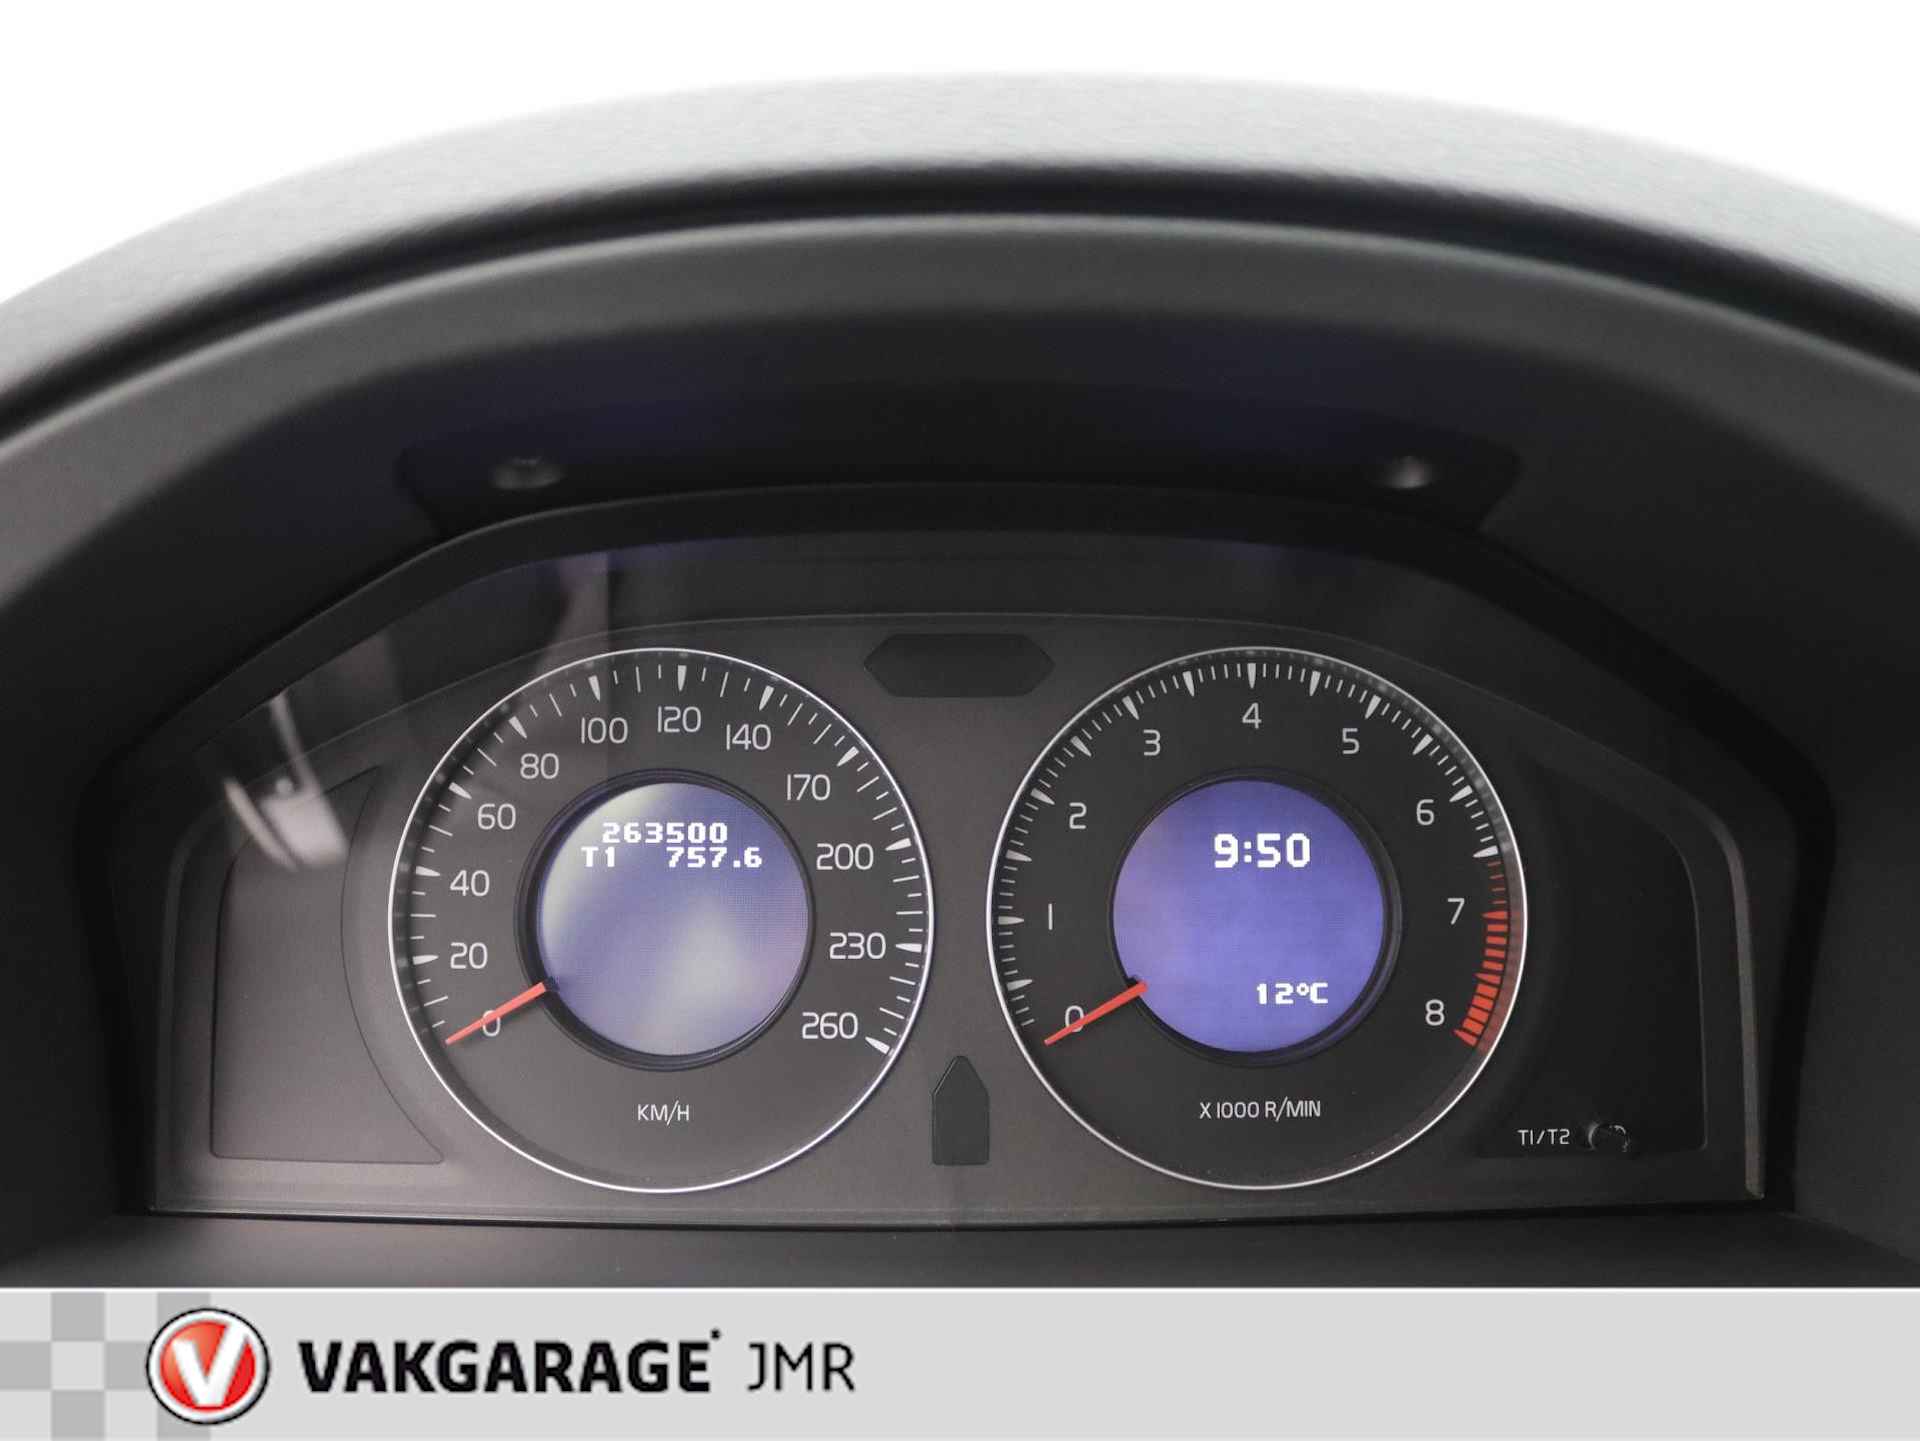 Volvo V70 2.5FT Momentum Youngtimer Trekhaak - PDC Achter - Stoel + Achterbank verwarming - Bluetooth - Climate en Cruise Control - 17/39